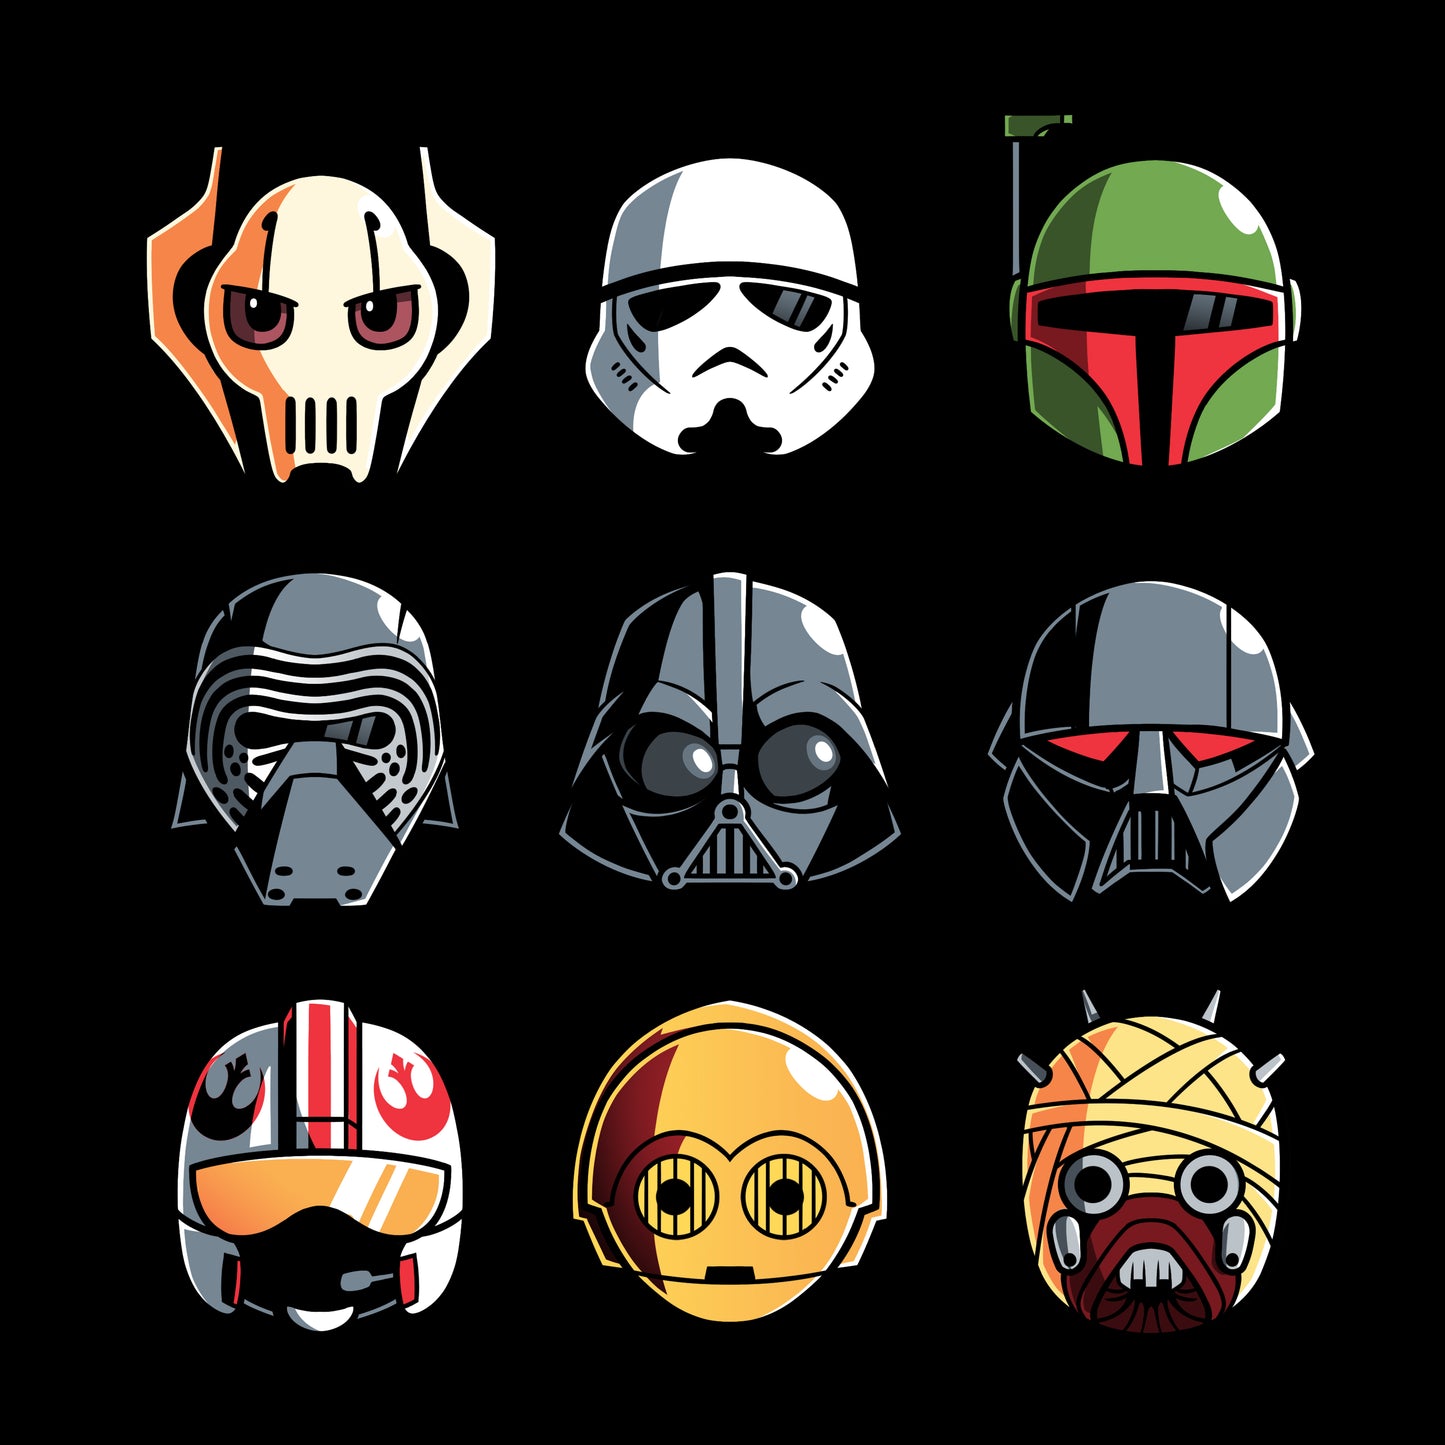 A collection of officially licensed Star Wars Masks featuring Darth Vader and Storm Trooper on a black background.